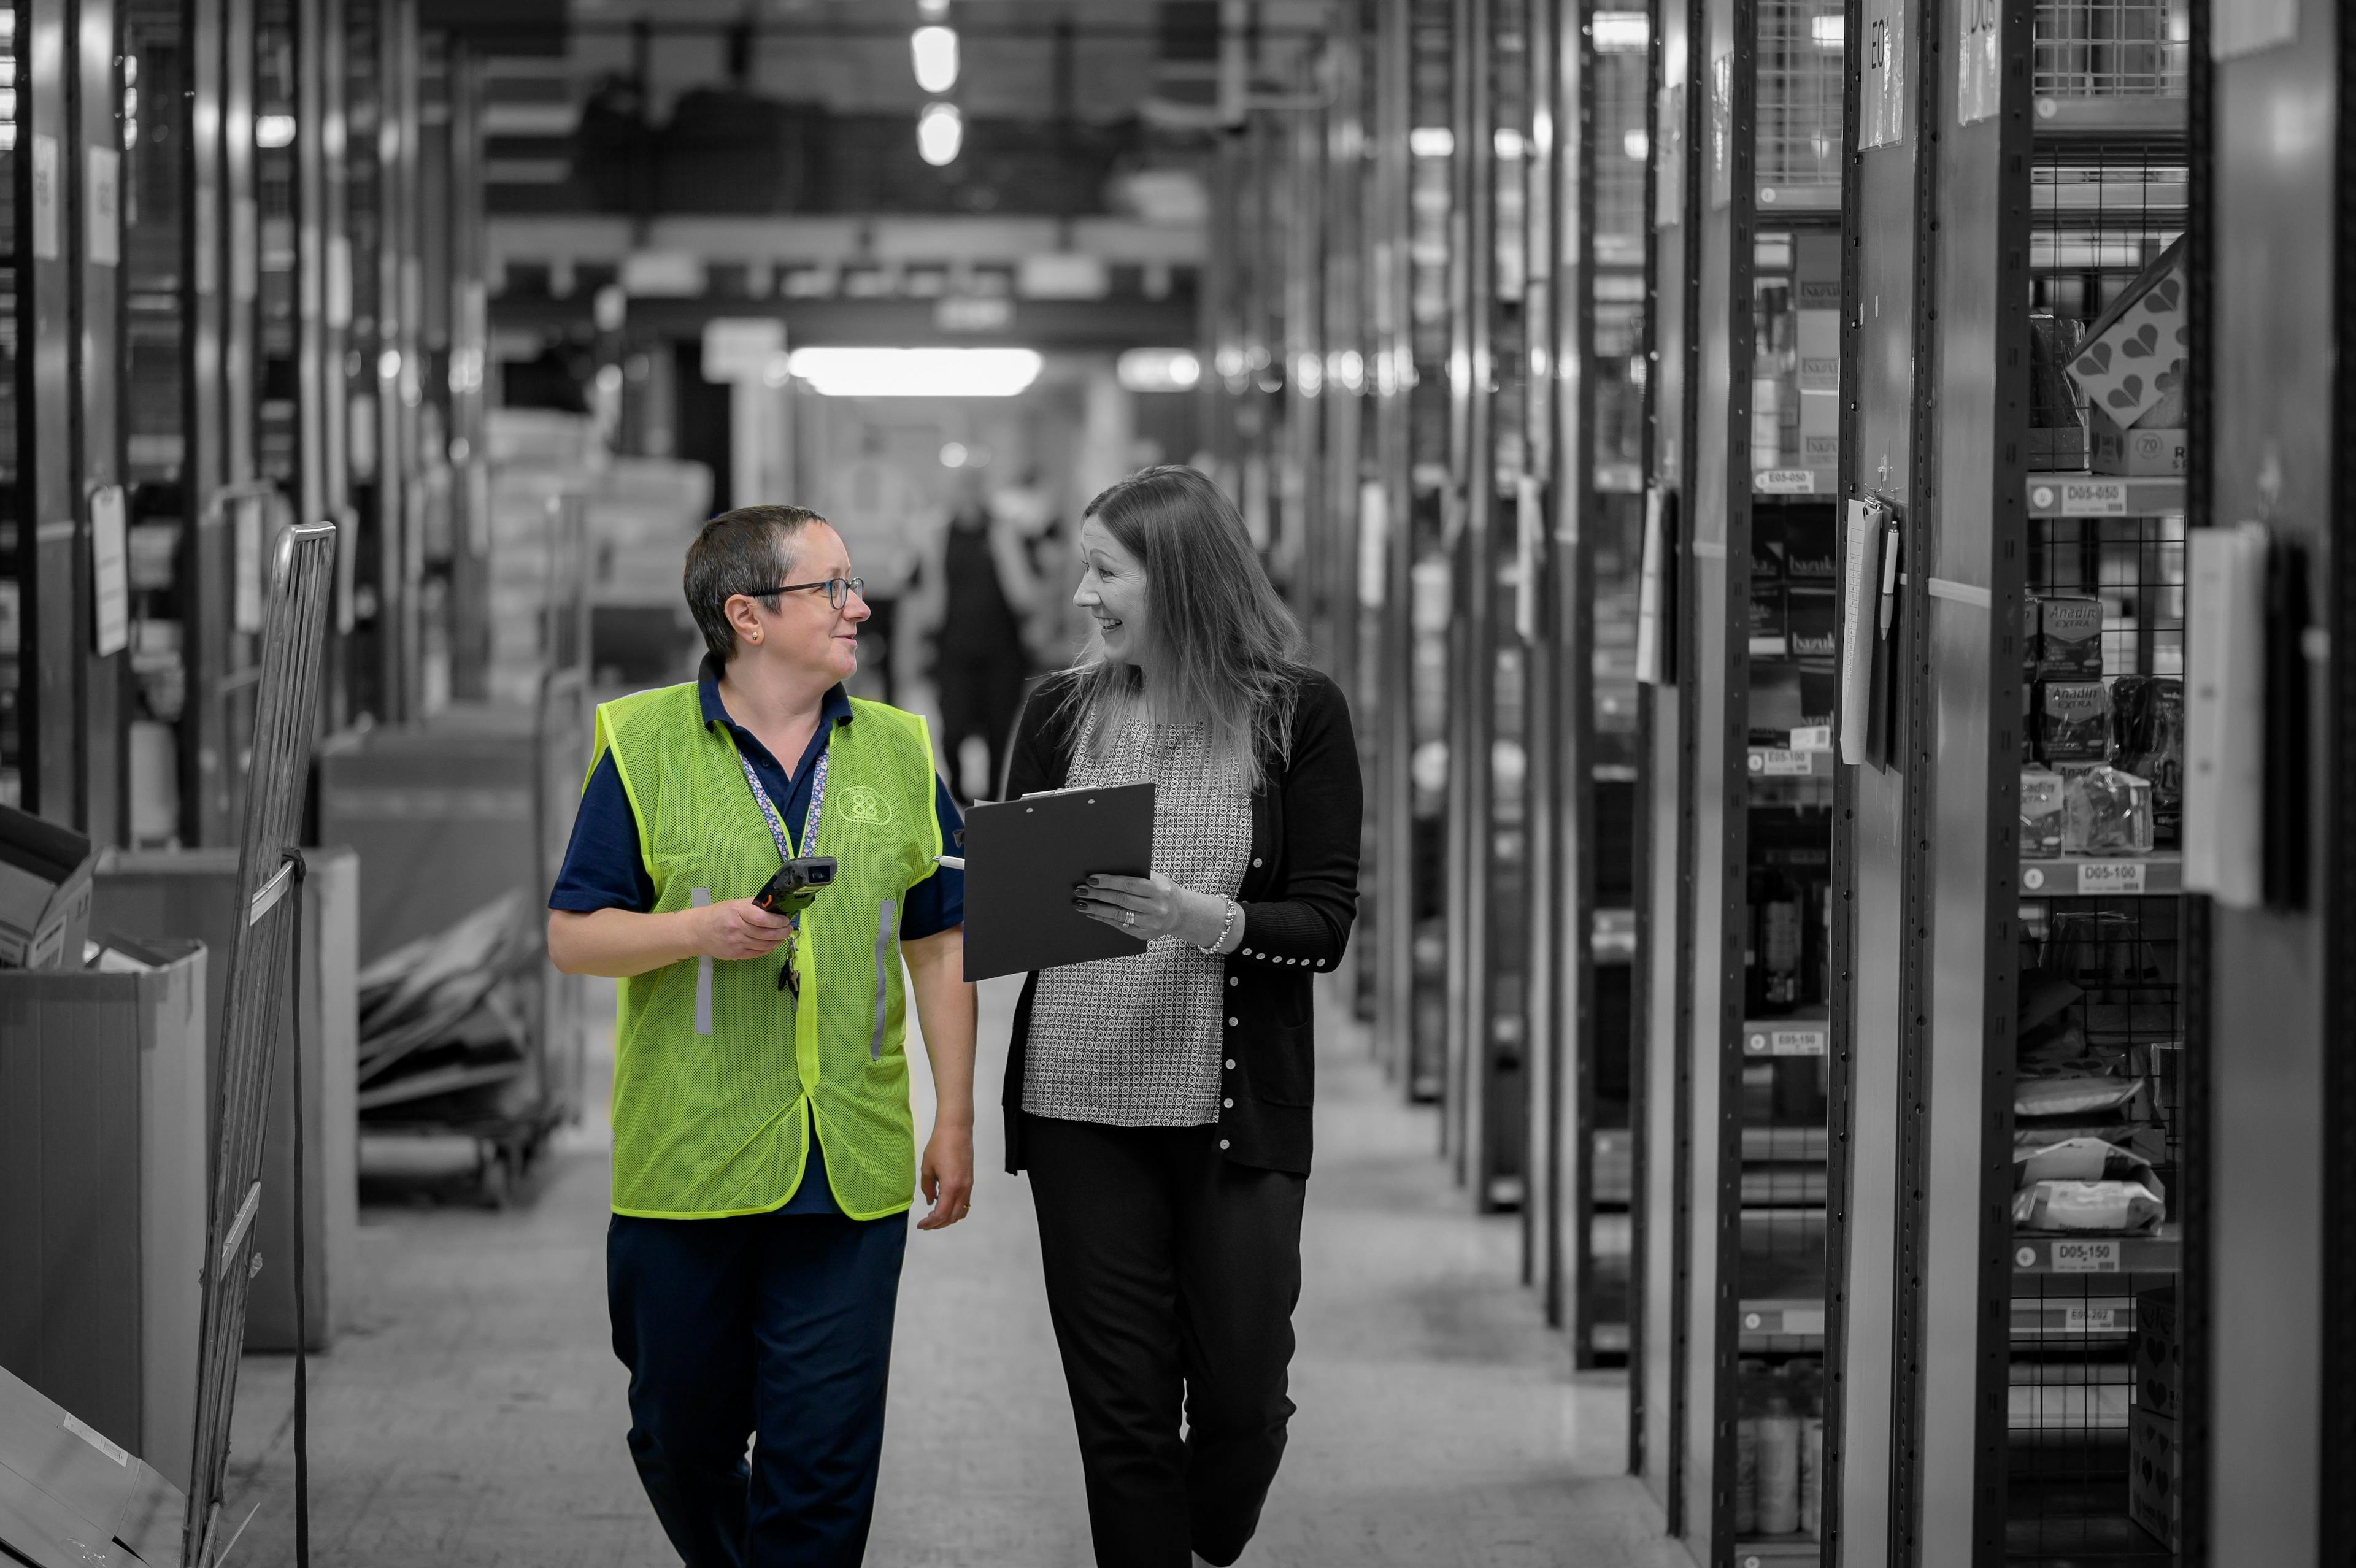 Retail worker talking and smiling with a colleague in a warehouse